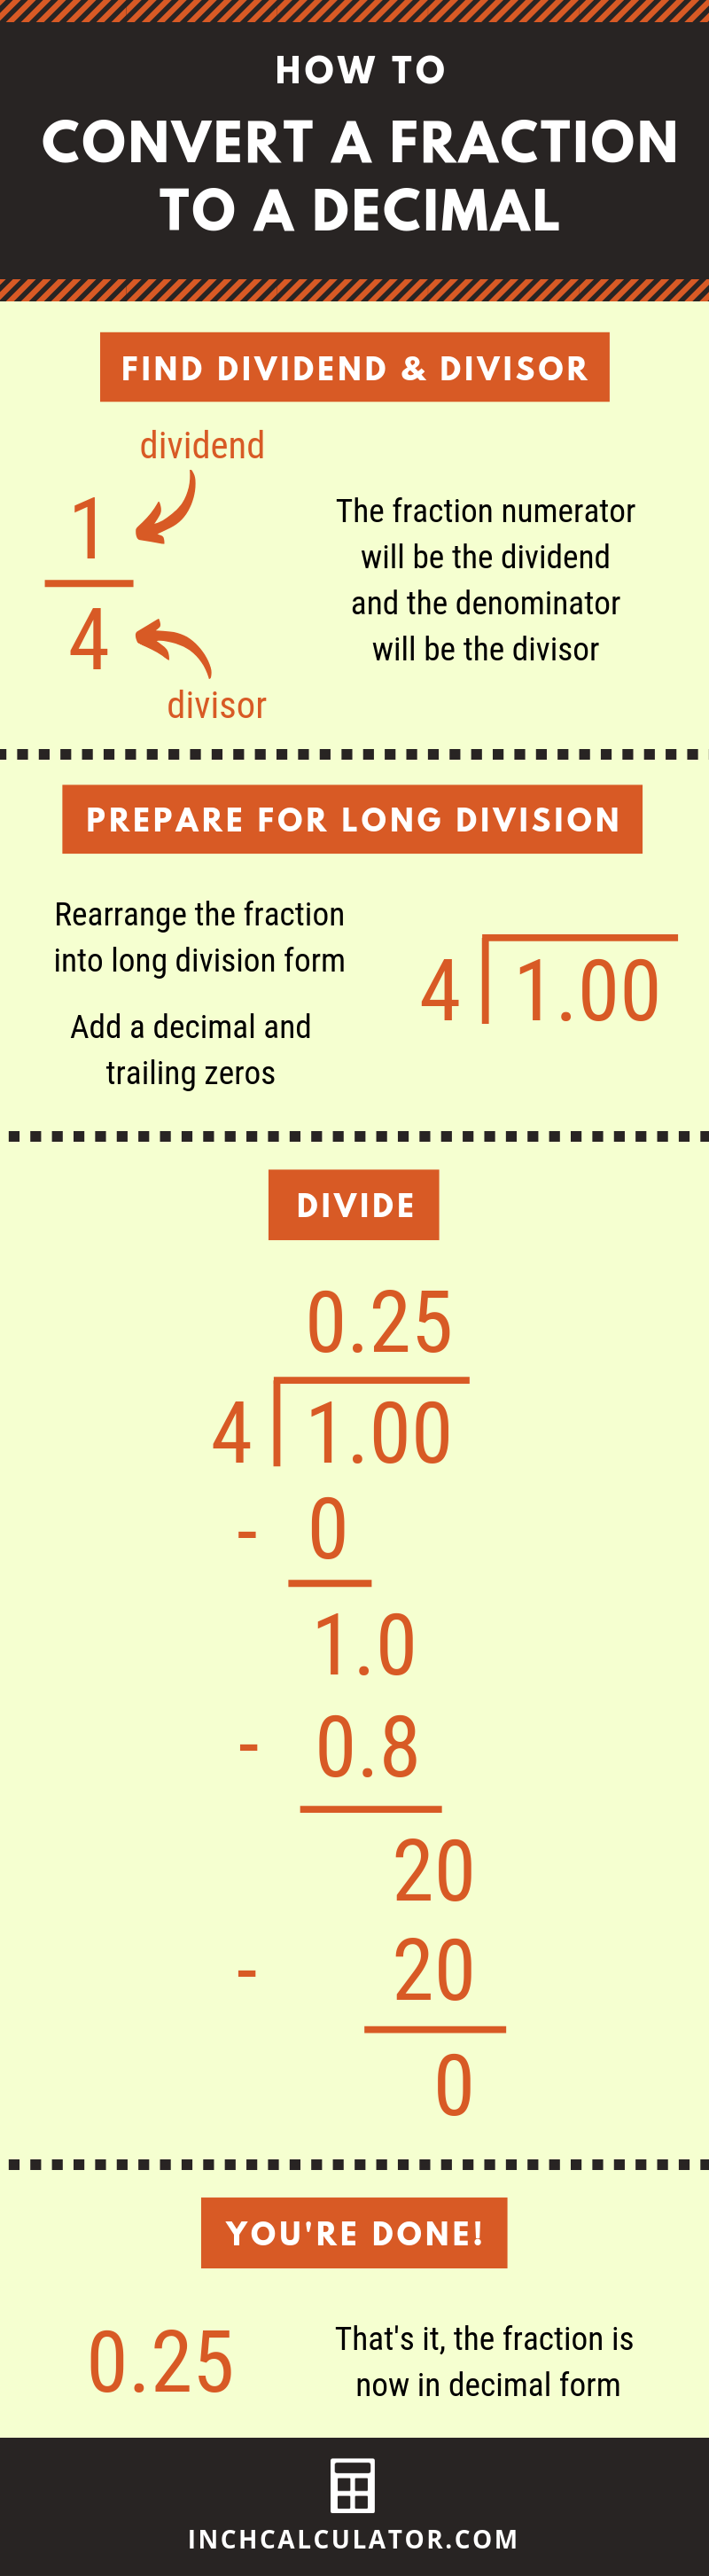 Infographic demonstrating how to convert from a fraction to decimal using long division